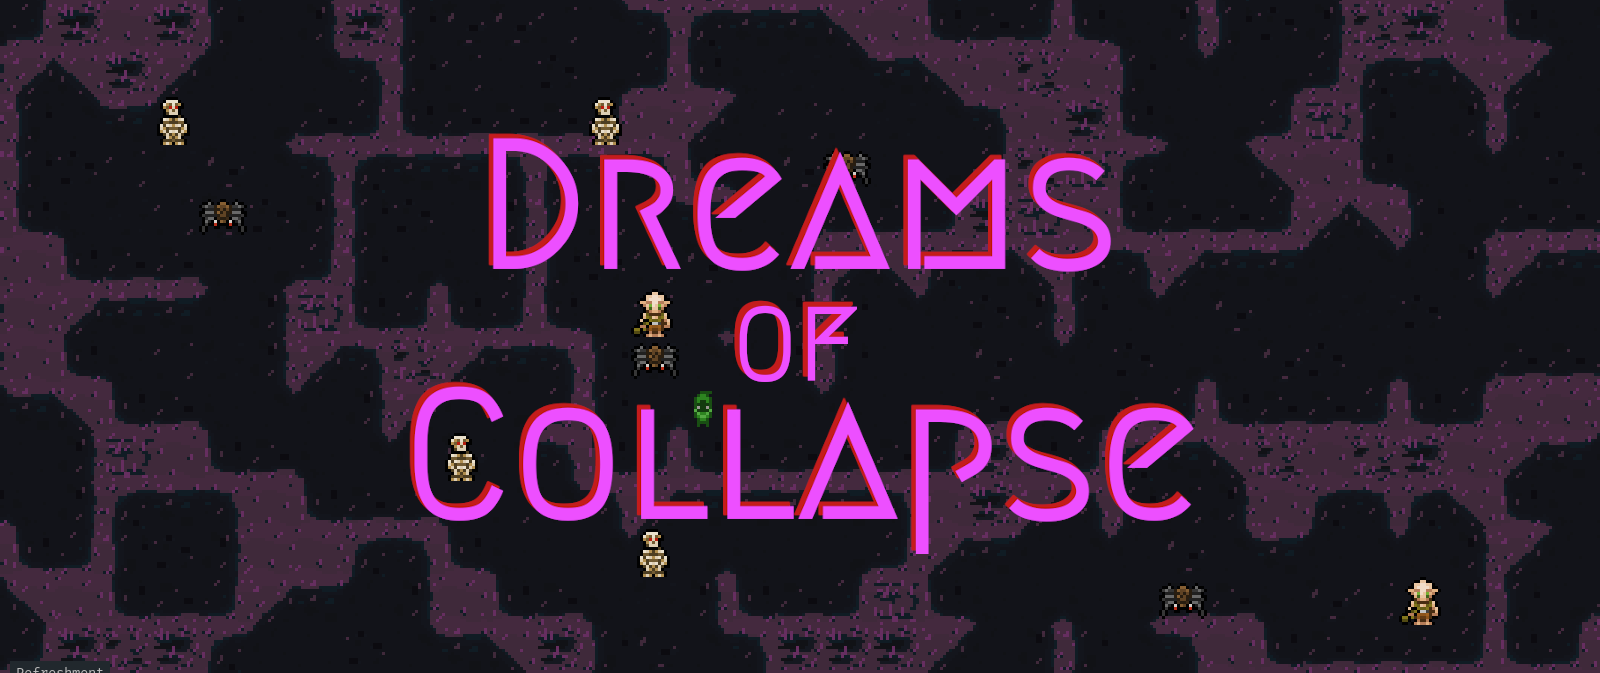 Image showing some monsters in some purple 2D caves, with the Dreams of Collapse logo.